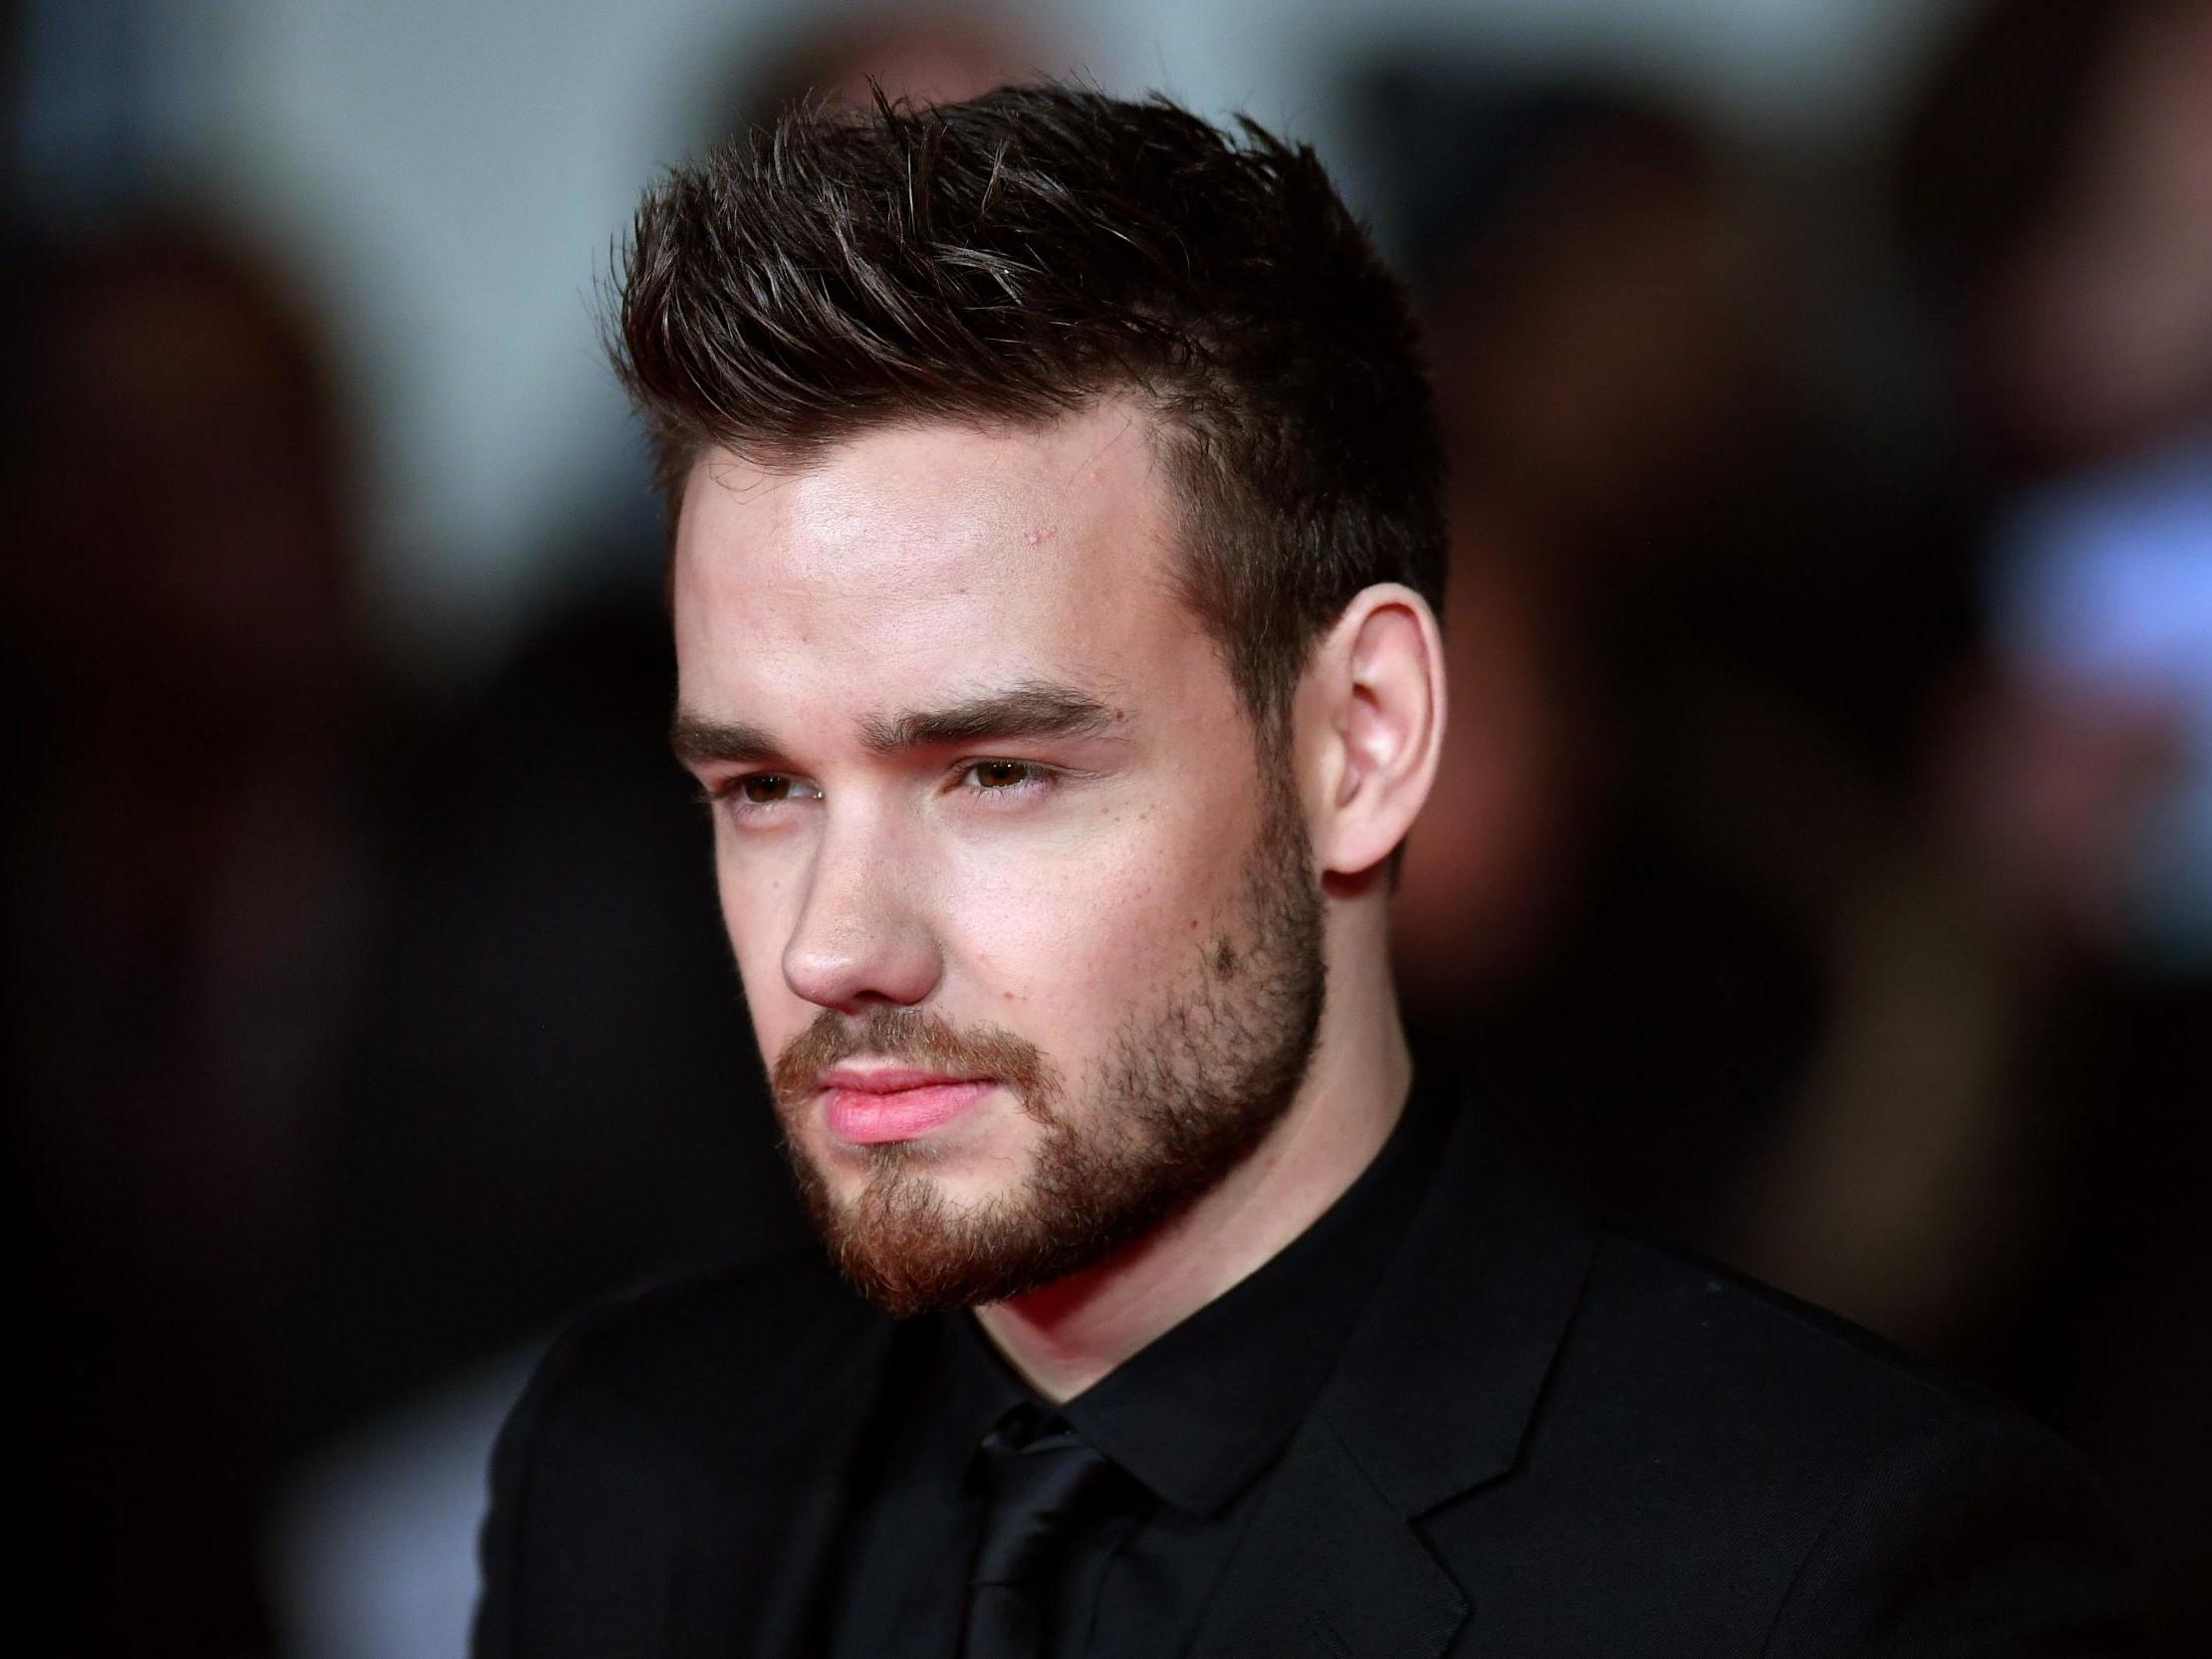 Meńs wear | Liam payne hairstyle, Mens hairstyles with beard, Hair and  beard styles